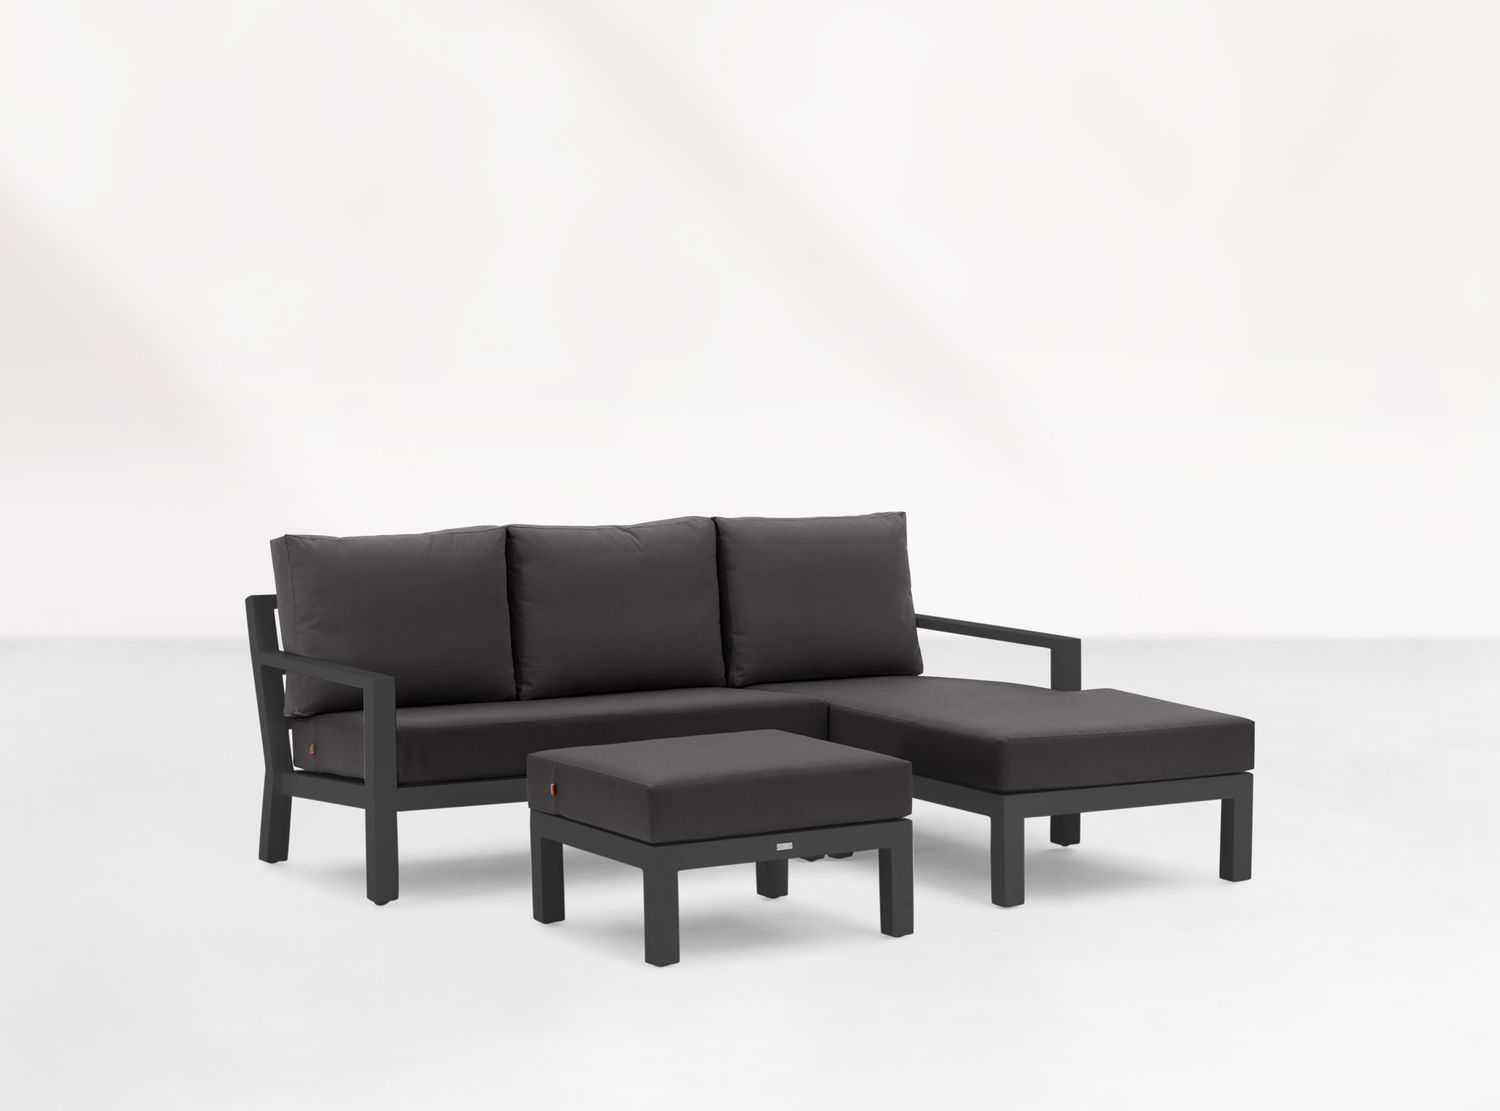 LIFE Dining-Loungeecke Set2 TIMBER lava inkl. Polster in